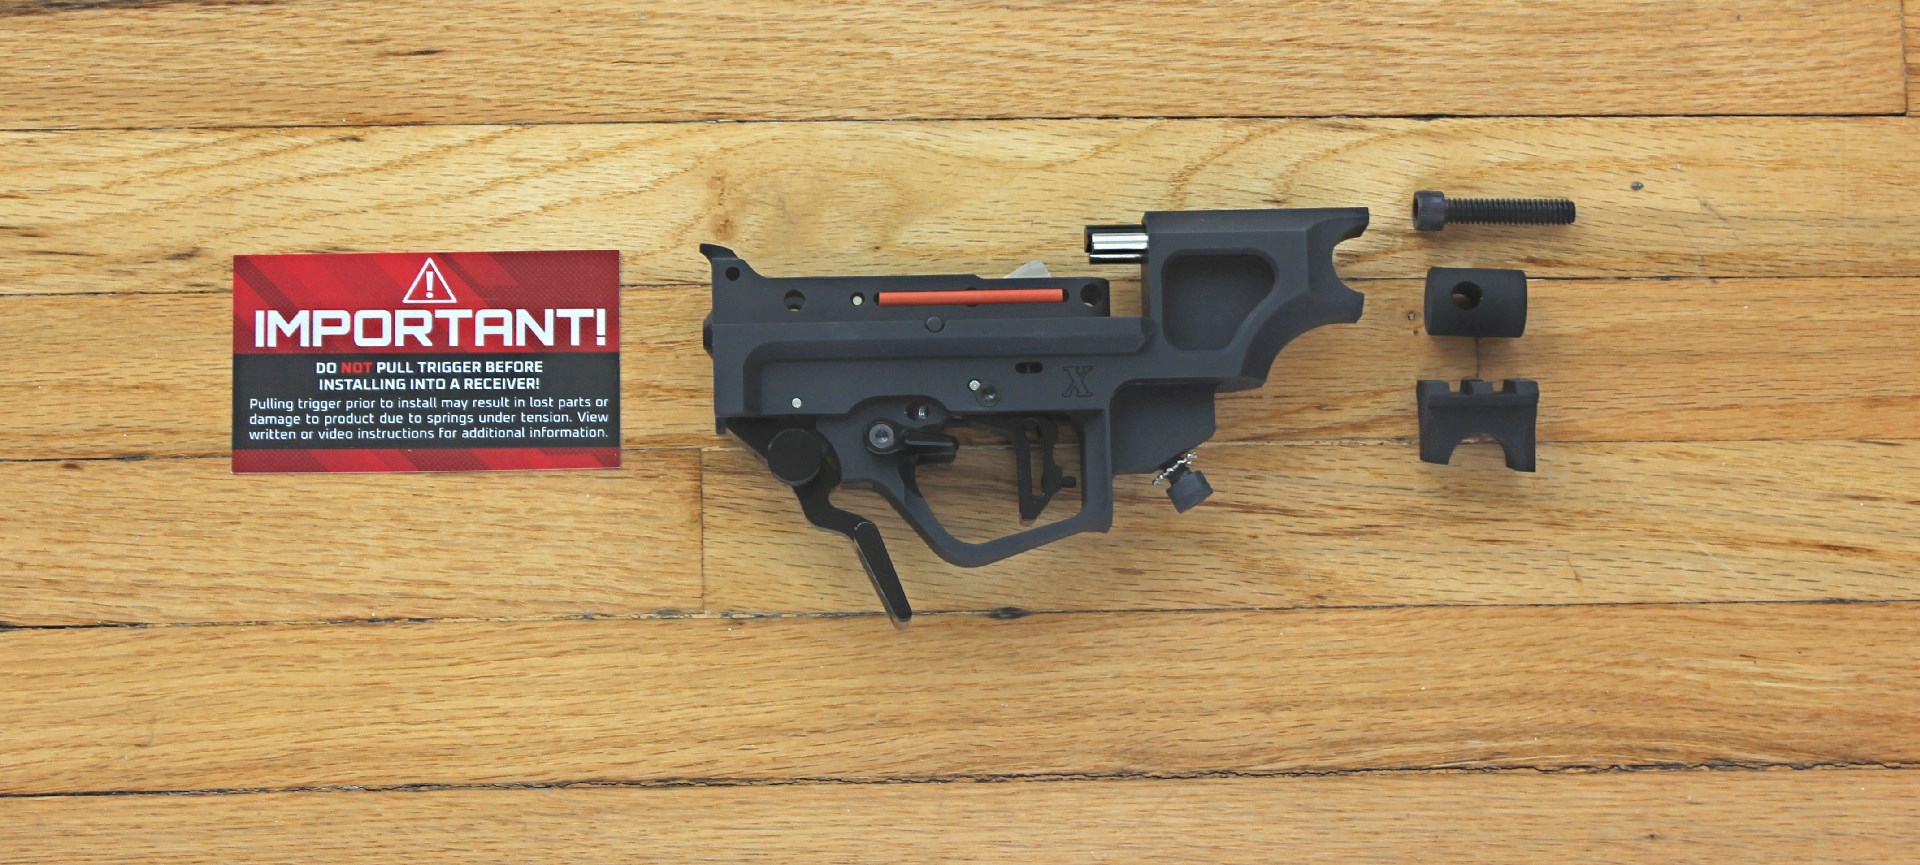 Manticore X lower receiver .22 LR parts rifle build warning label